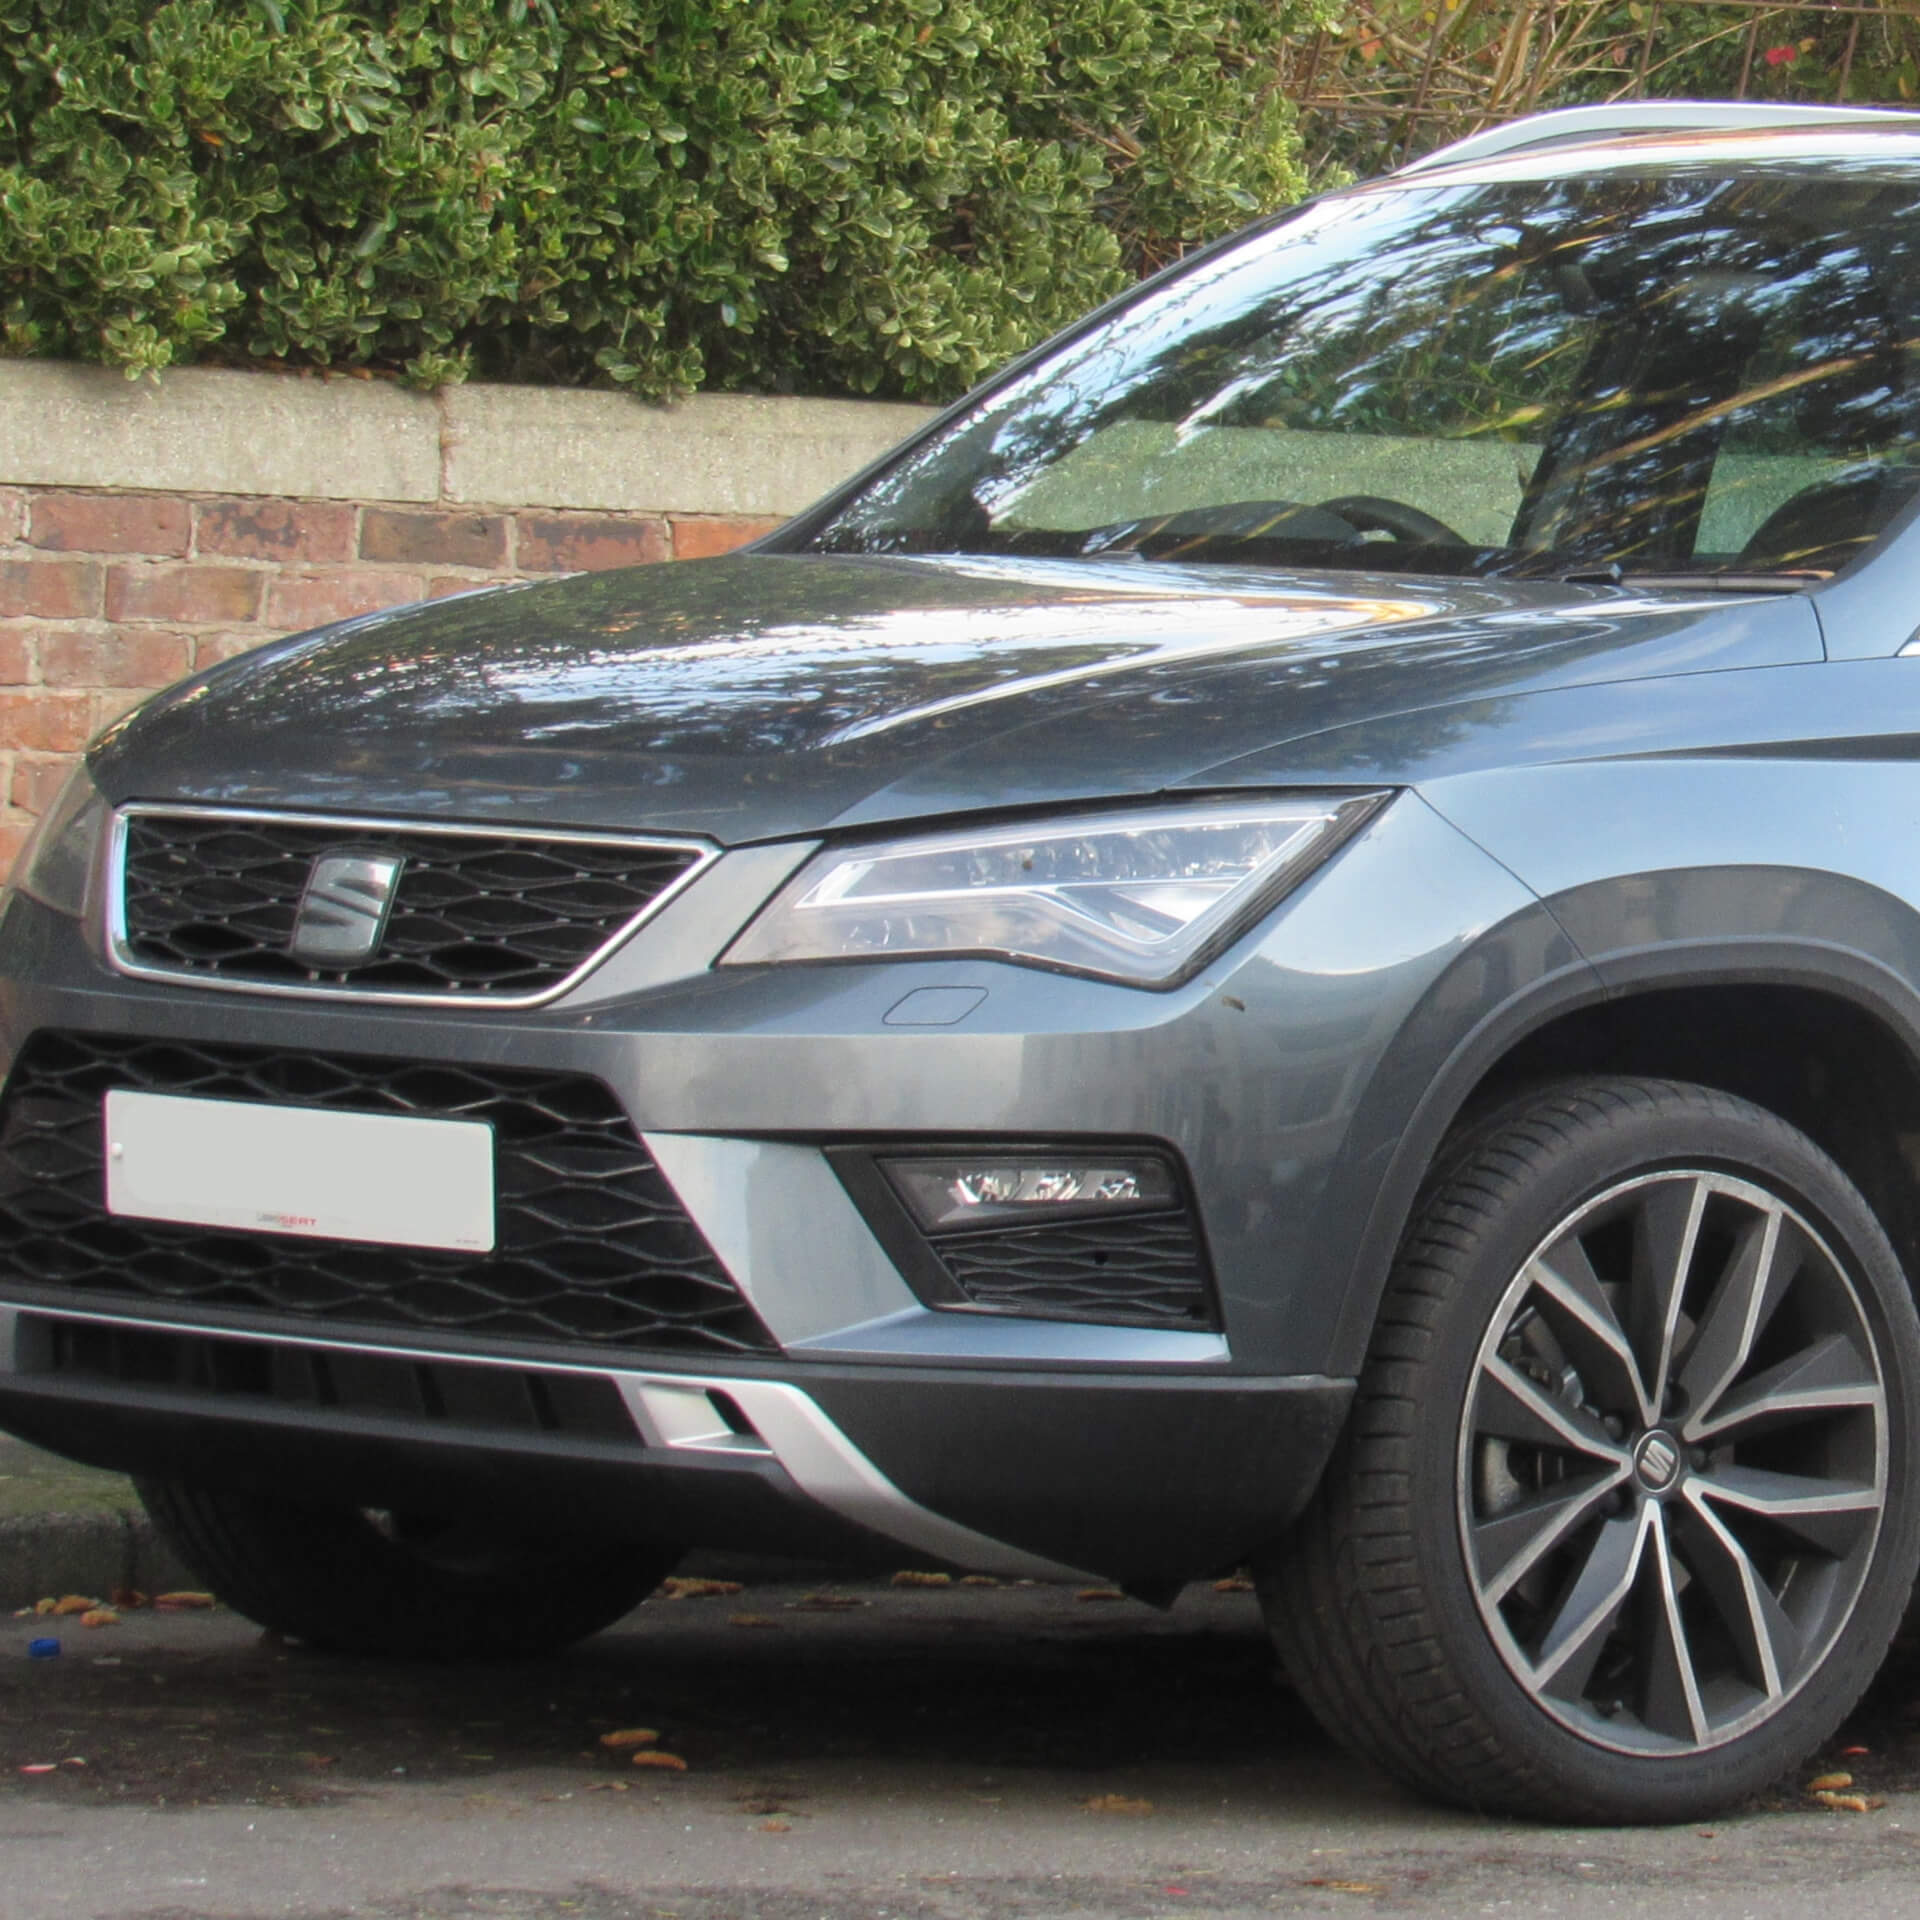 Direct4x4 Accessories for Seat Tarraco Vehicles